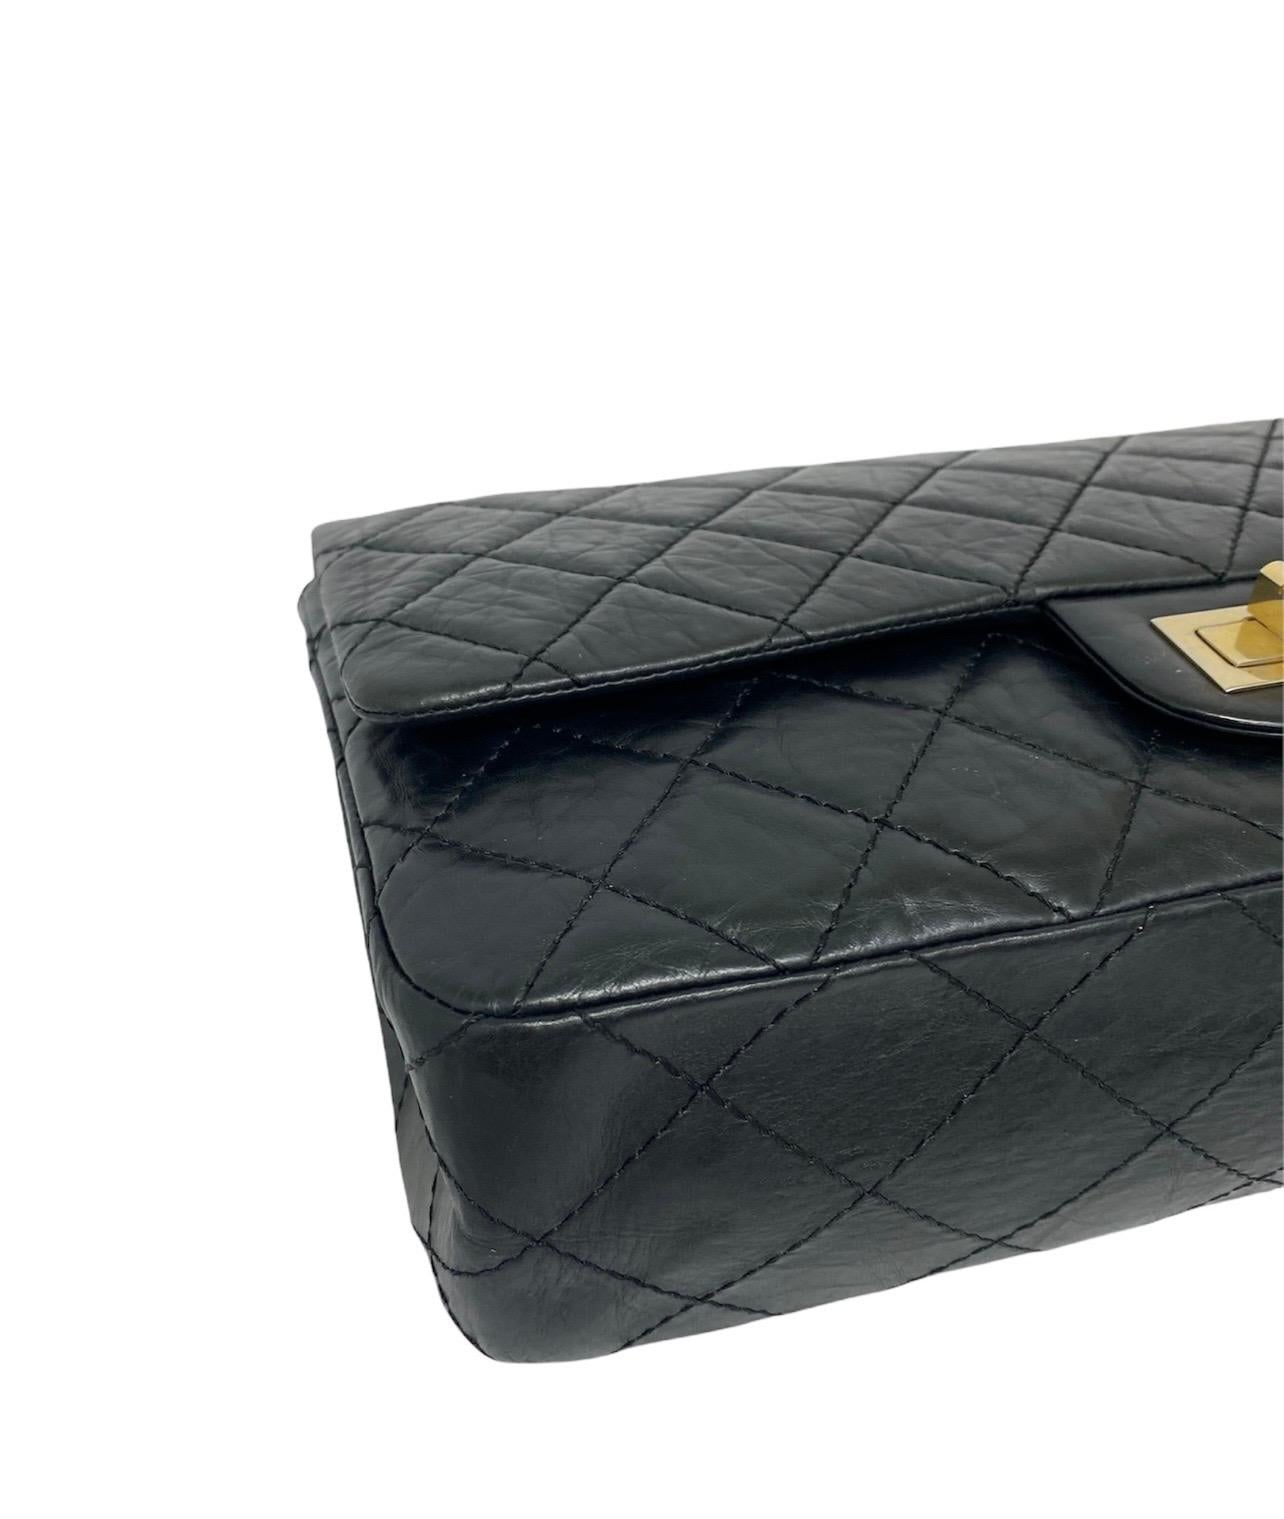 Chanel Black Leather 2.55 Limited Edition Bag 3